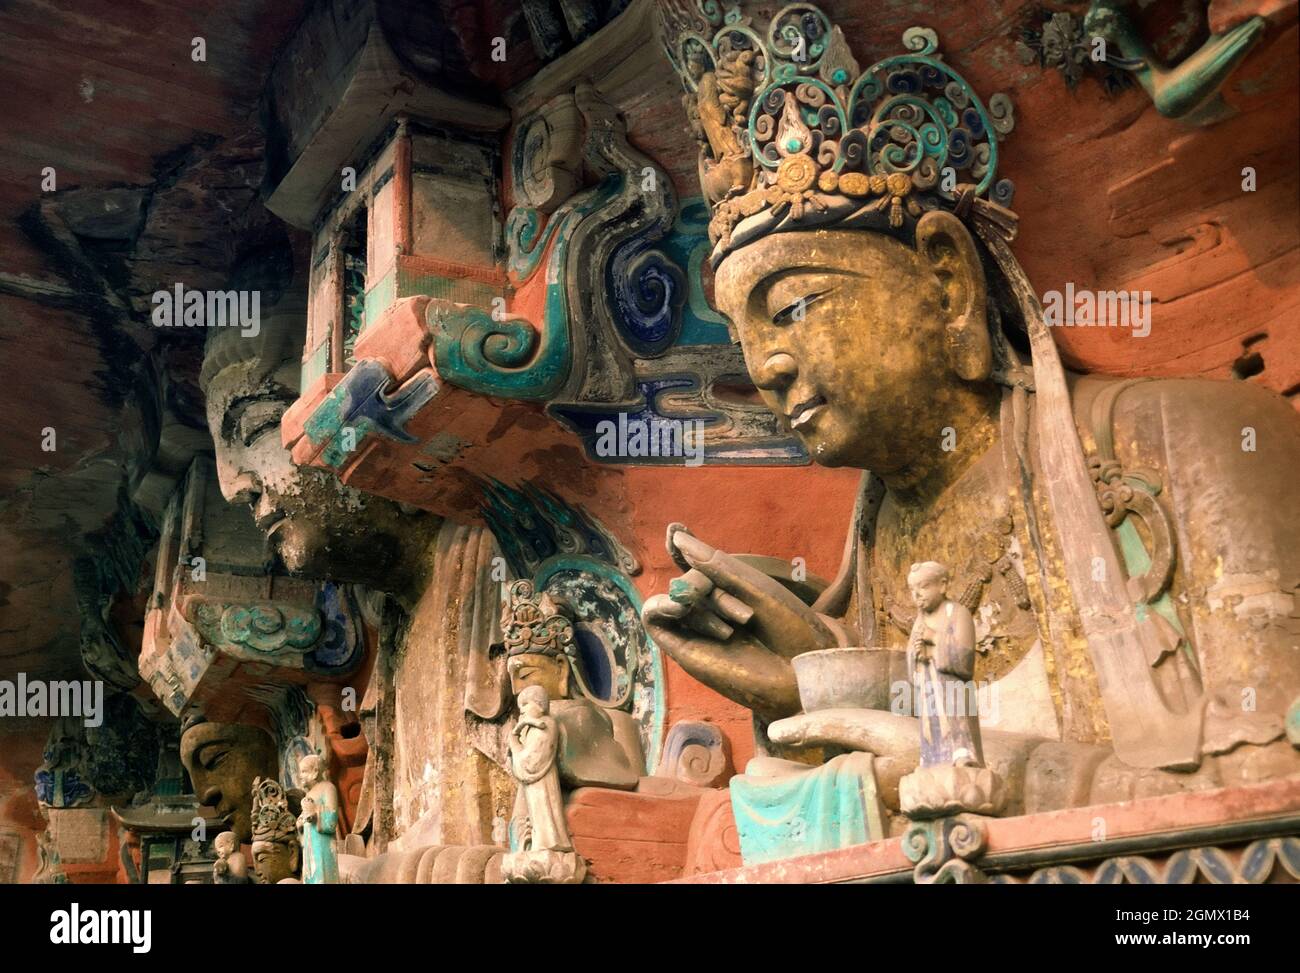 Chongqing, Sichuan, China - December 1997 The spectacular Dazu Rock Carvings in Sichuan are a diverse series of Chinese religious sculptures and carvi Stock Photo